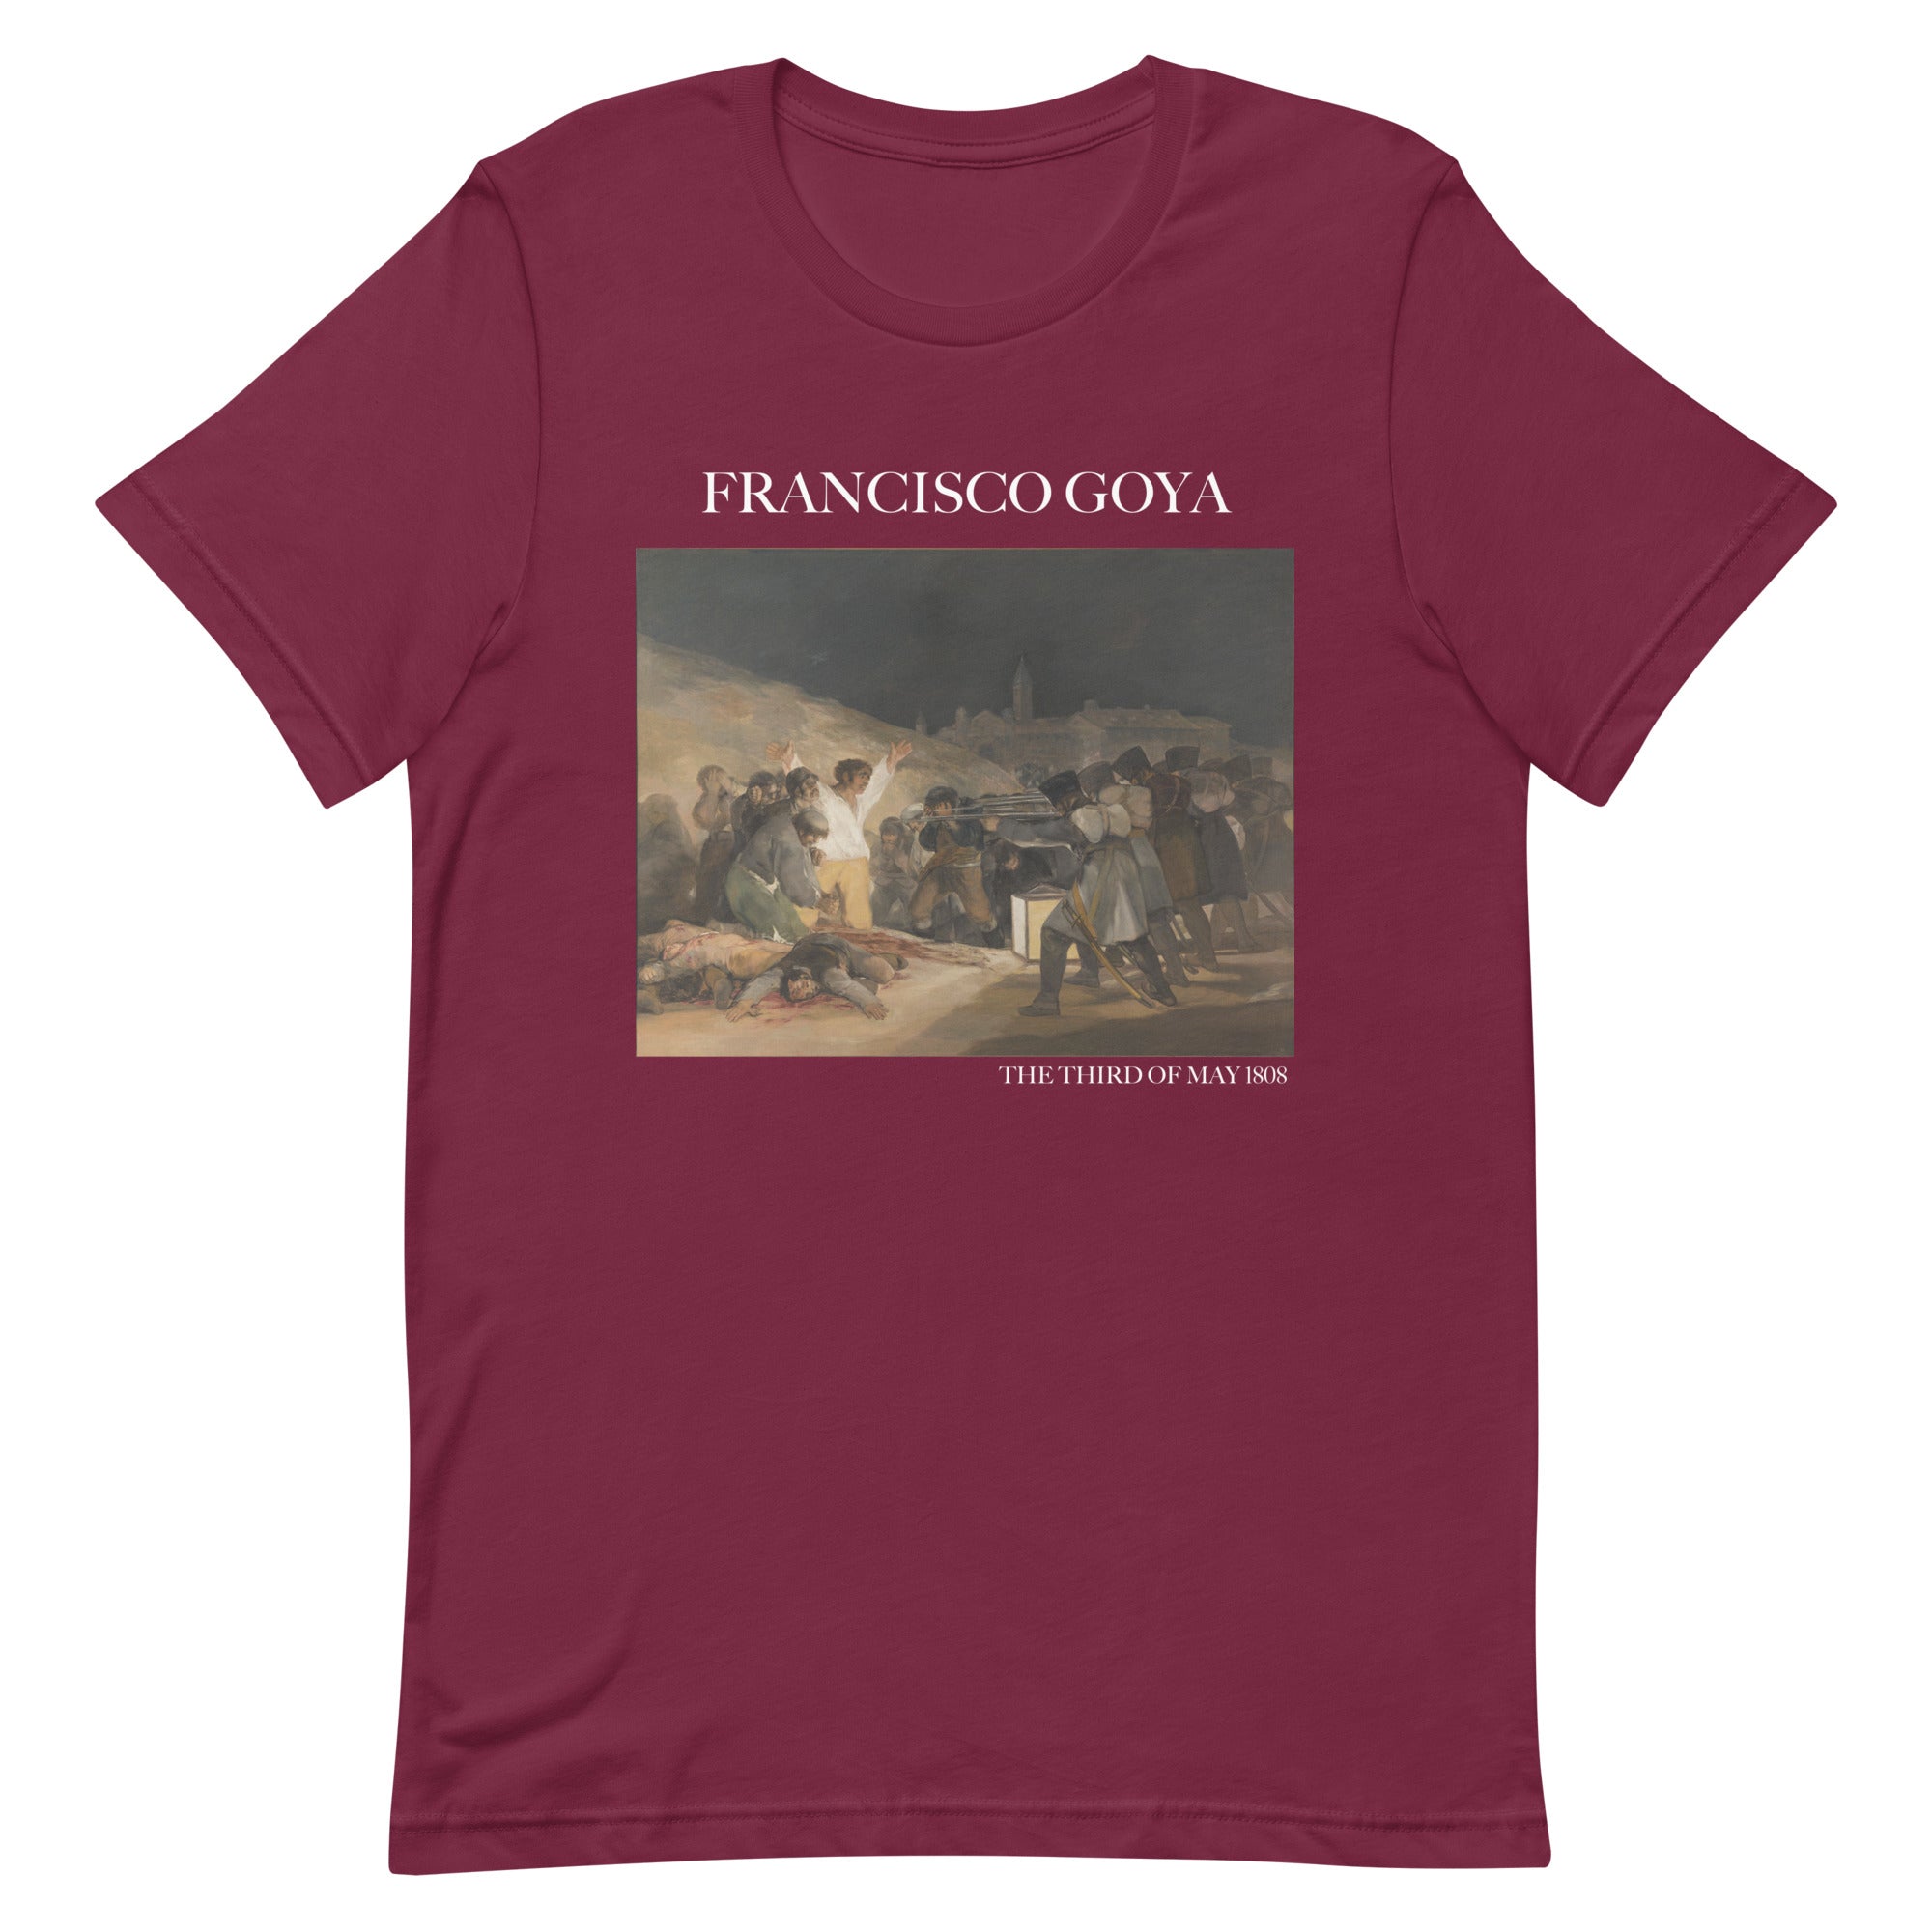 Francisco Goya 'The Third of May 1808' Famous Painting T-Shirt | Unisex Classic Art Tee